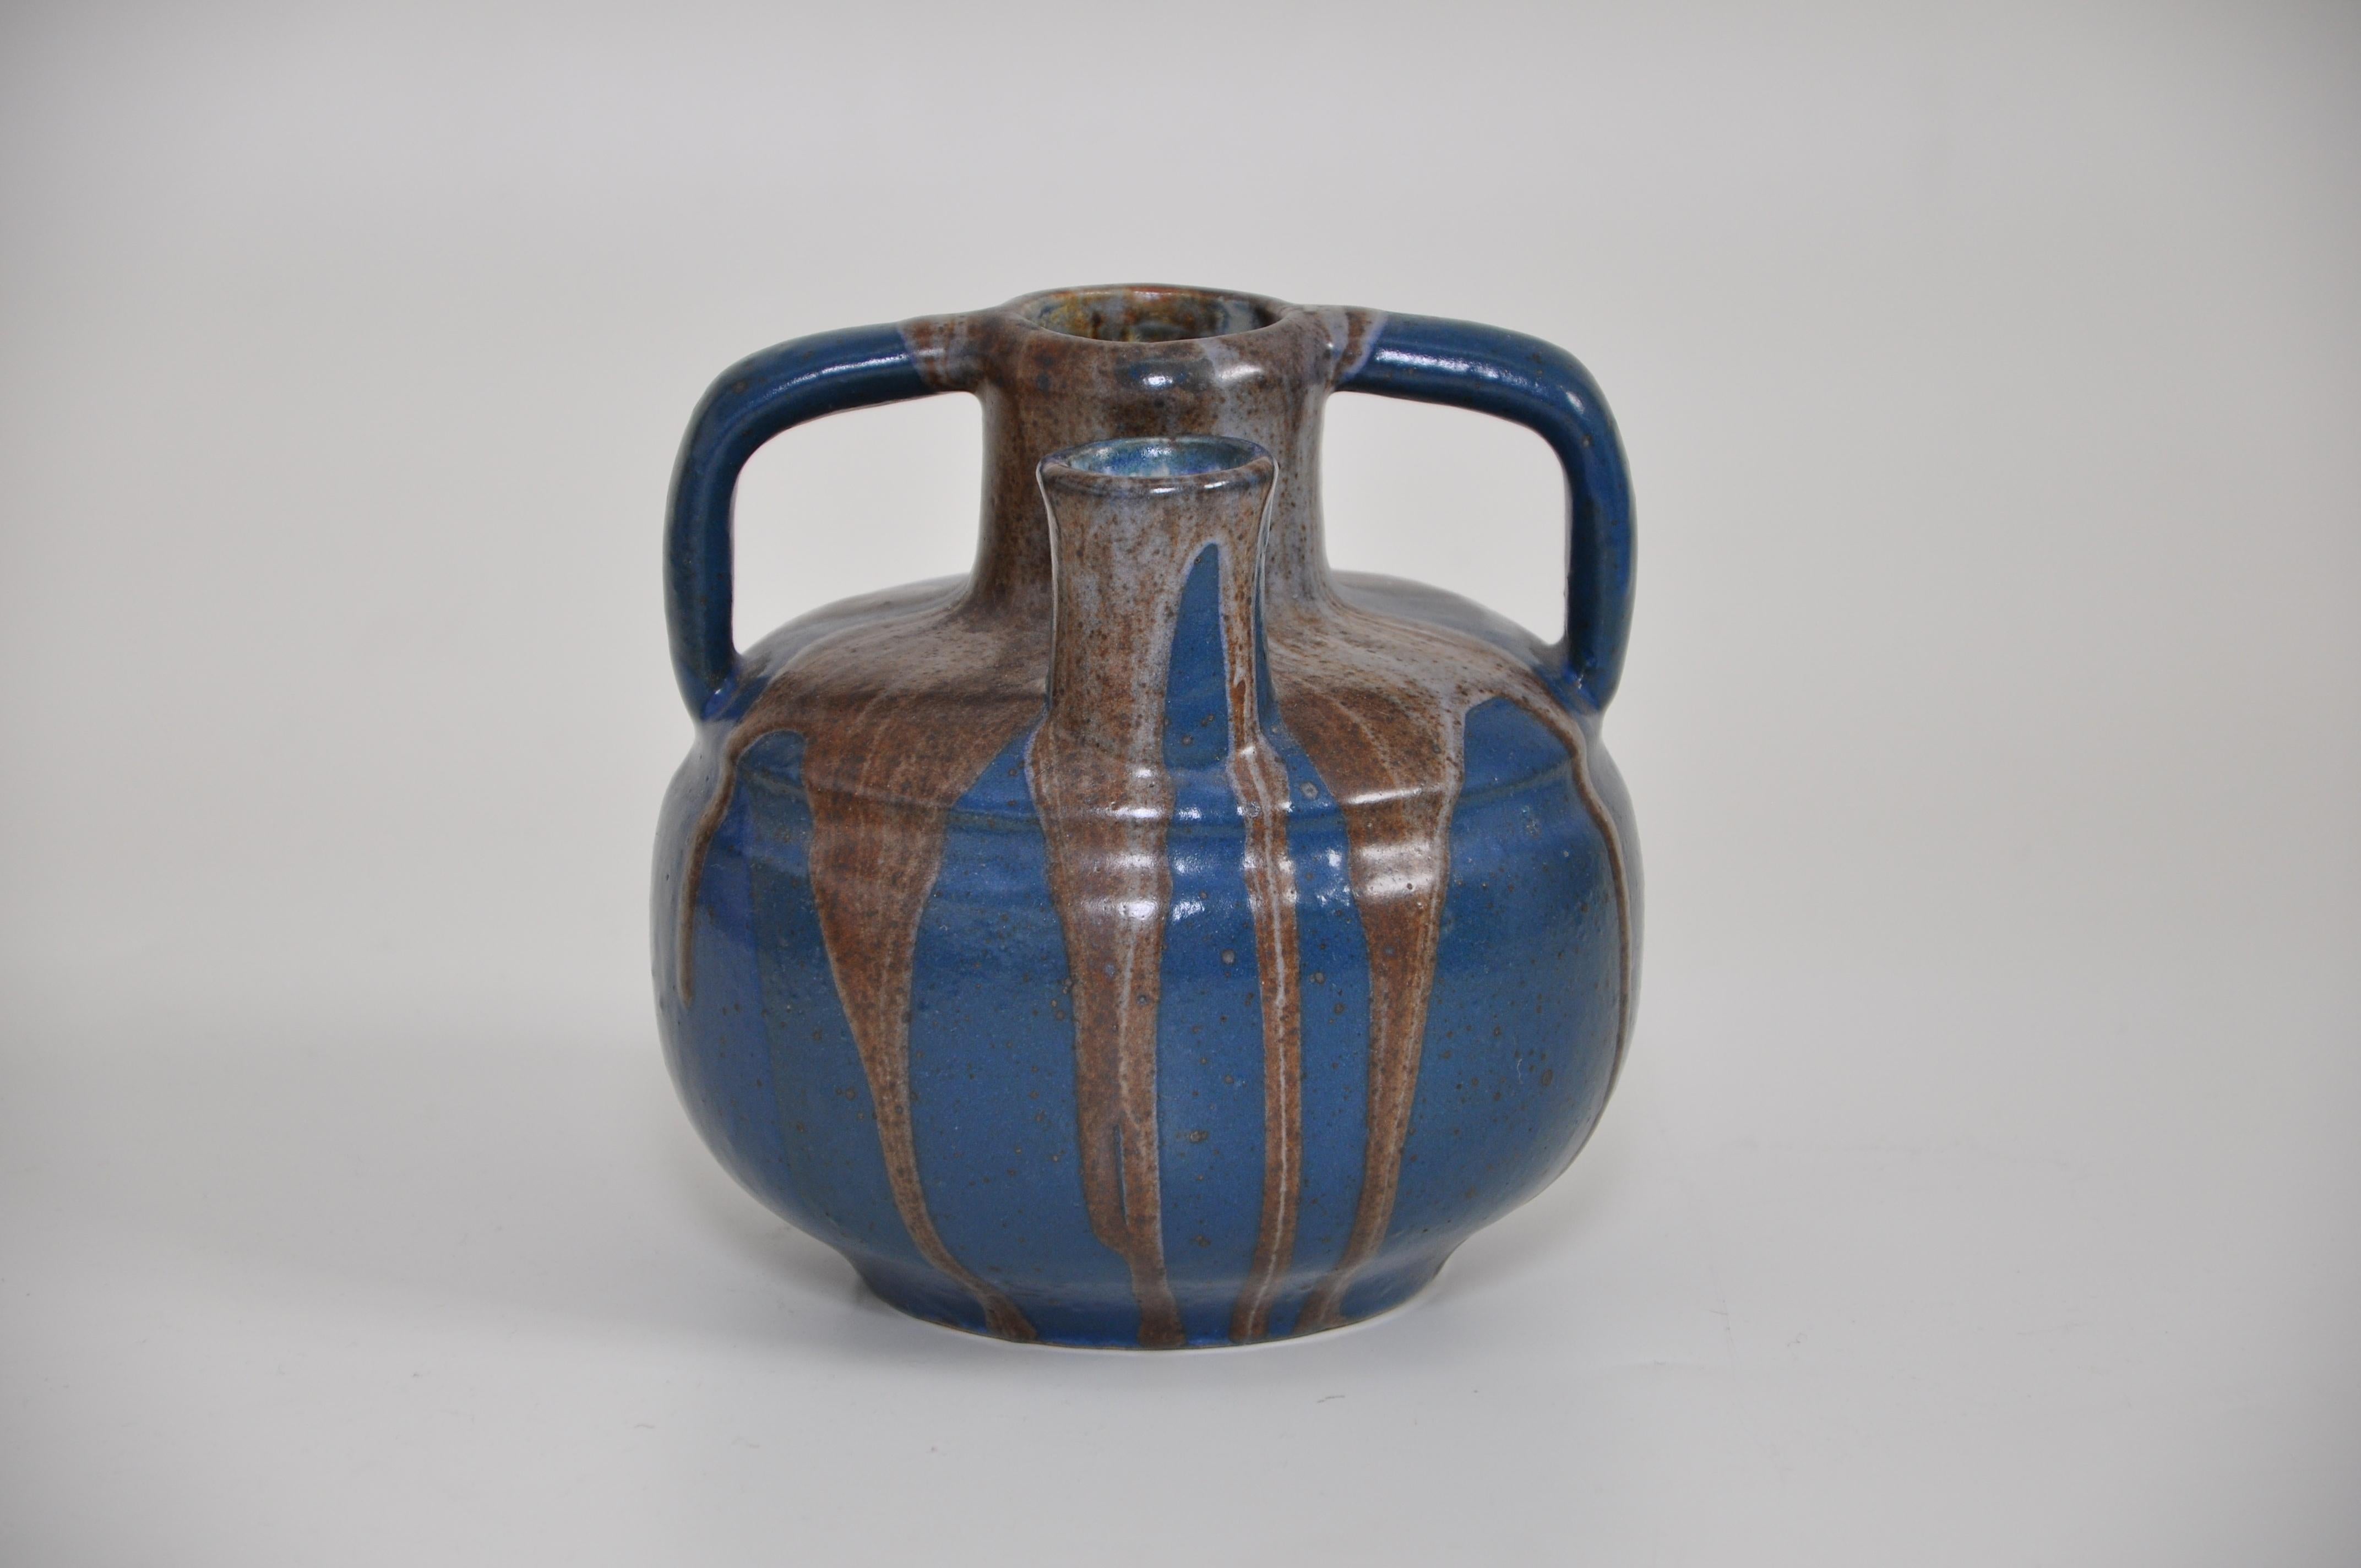 A large stoneware vase of Japoniste inspiration, of rare double-spout form with twin handles, covered with a flowing brown and pale blue drip-glaze over a deep blue body, by the French art ceramist Leon Pointu (1879-1942), the son of Jean Pointu (a